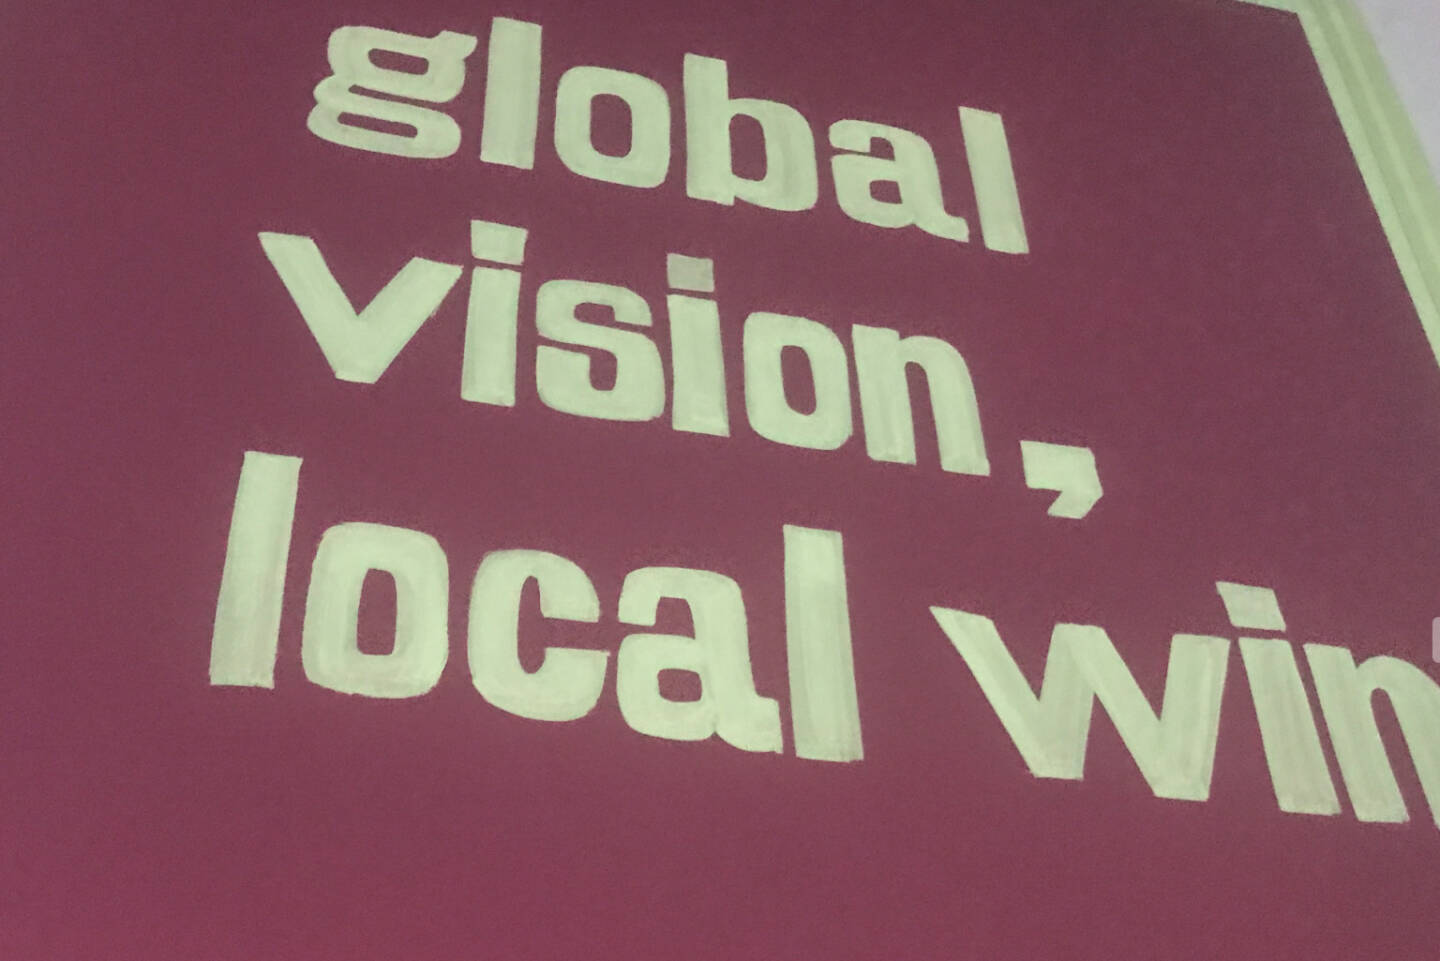 global vision, local win